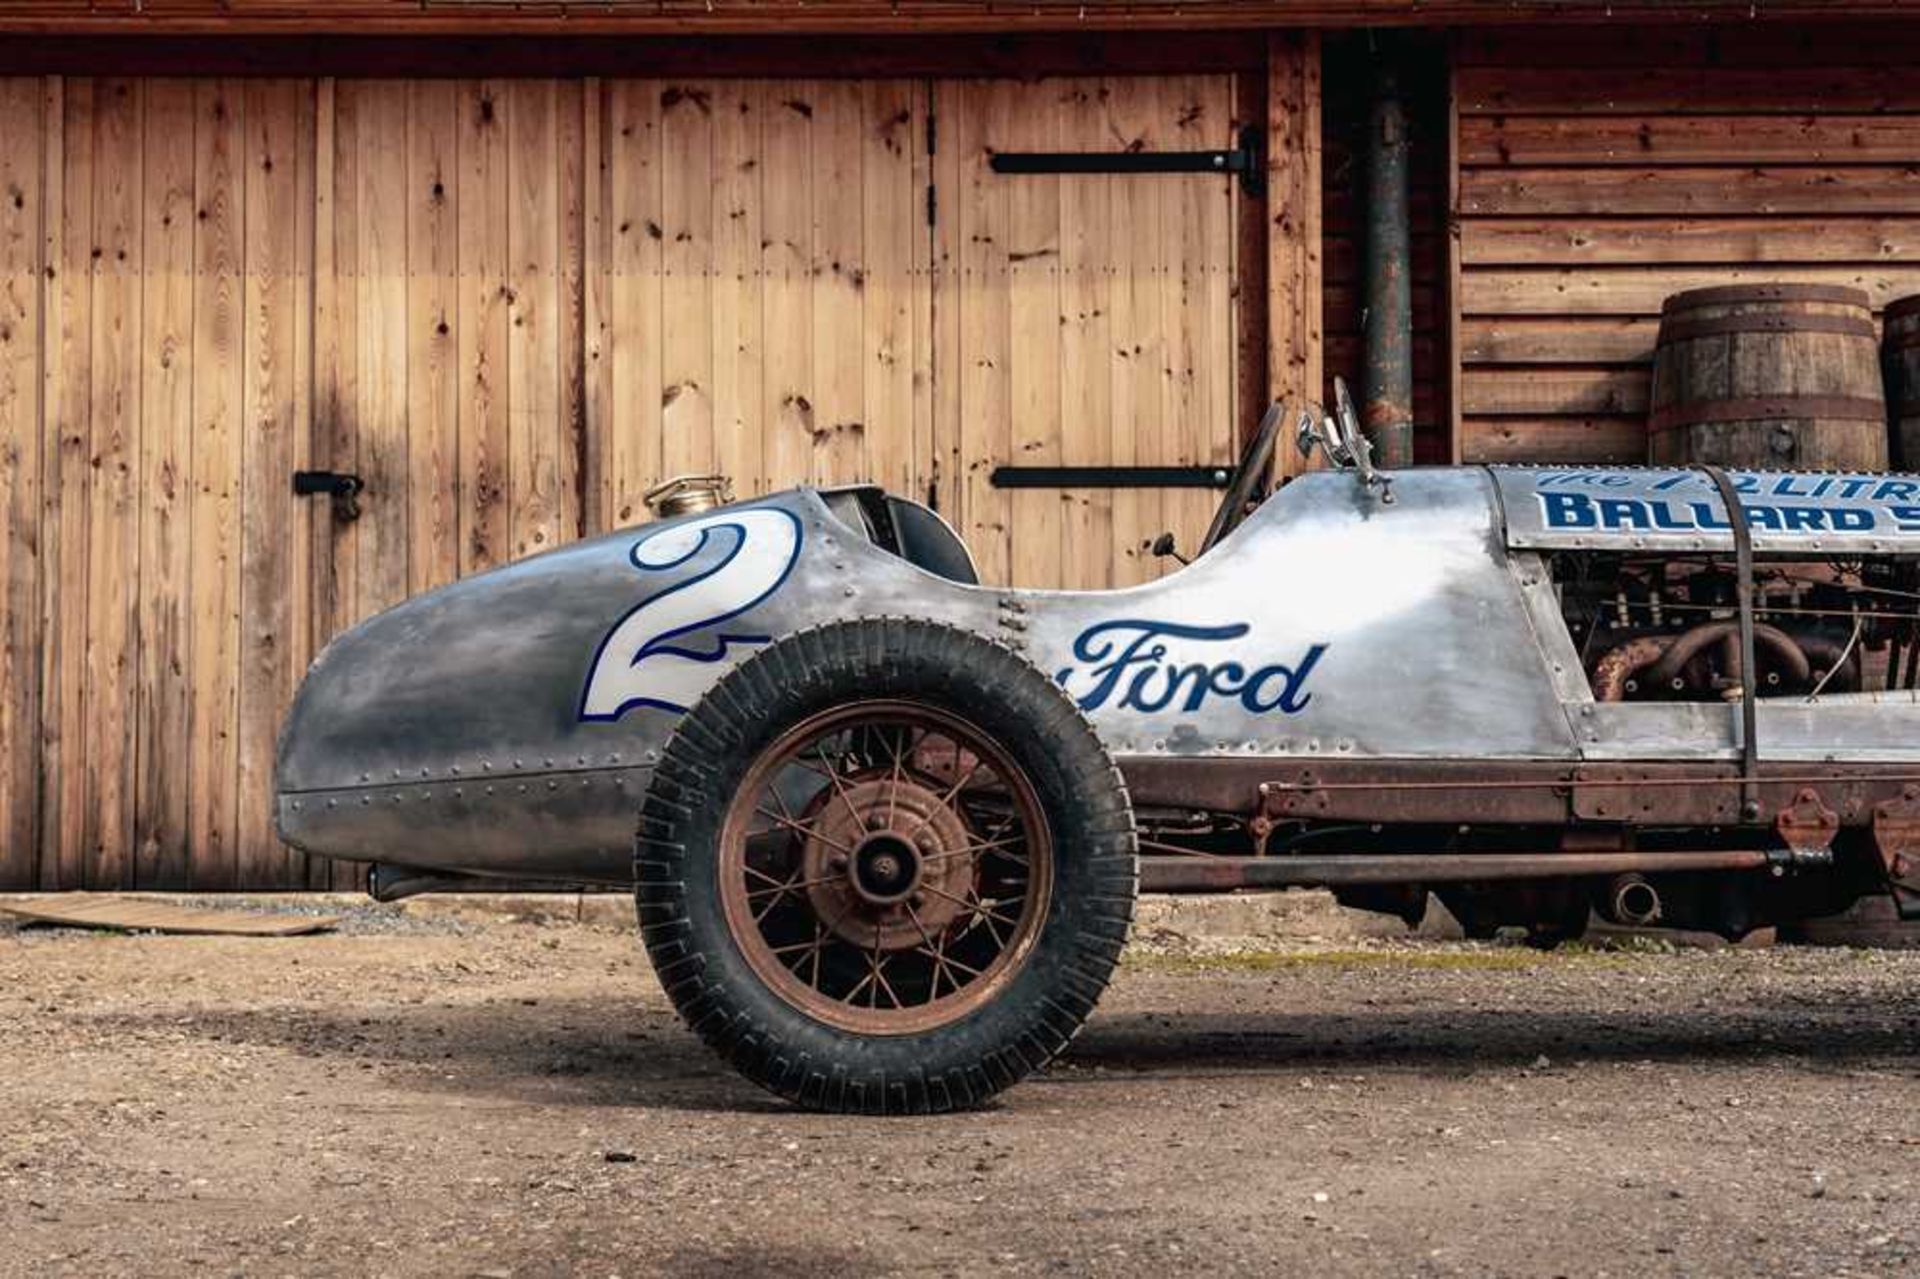 1930 Ford Model A "The Ballard Special" Speedster One off, bespoke built twin-engined pre-war racing - Image 15 of 94